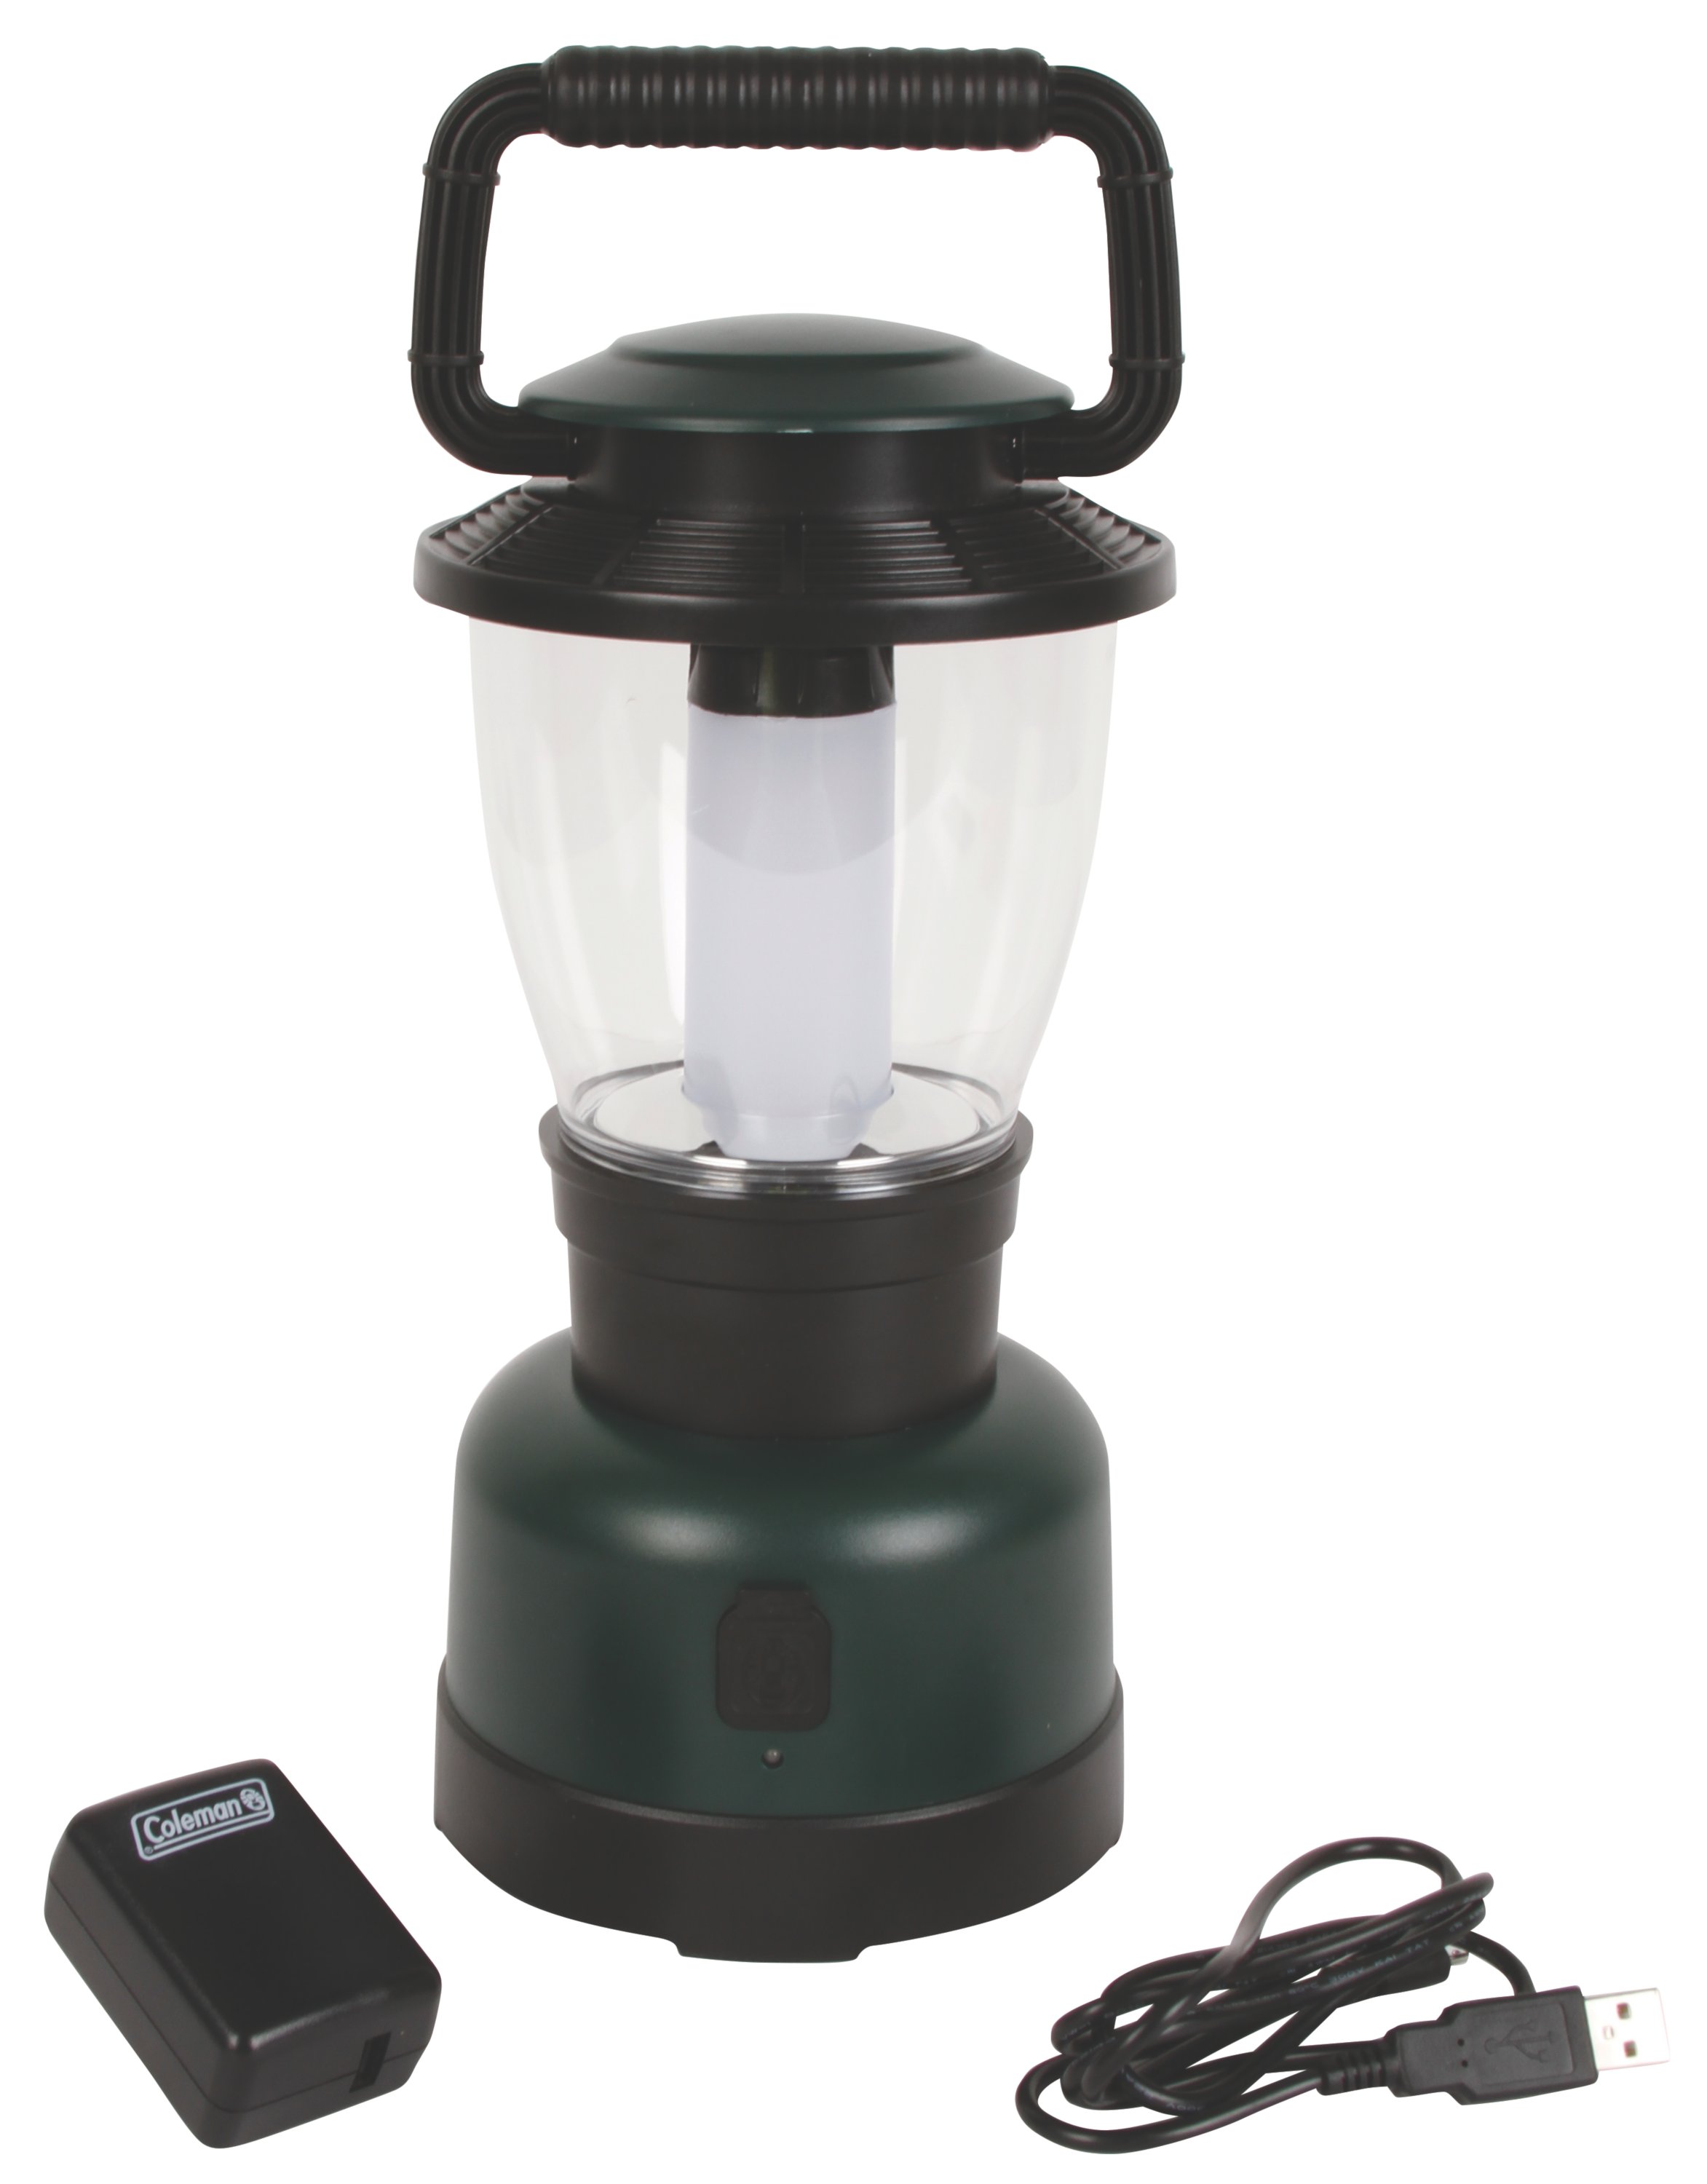 Rugged Rechargeable LED Lantern Coleman